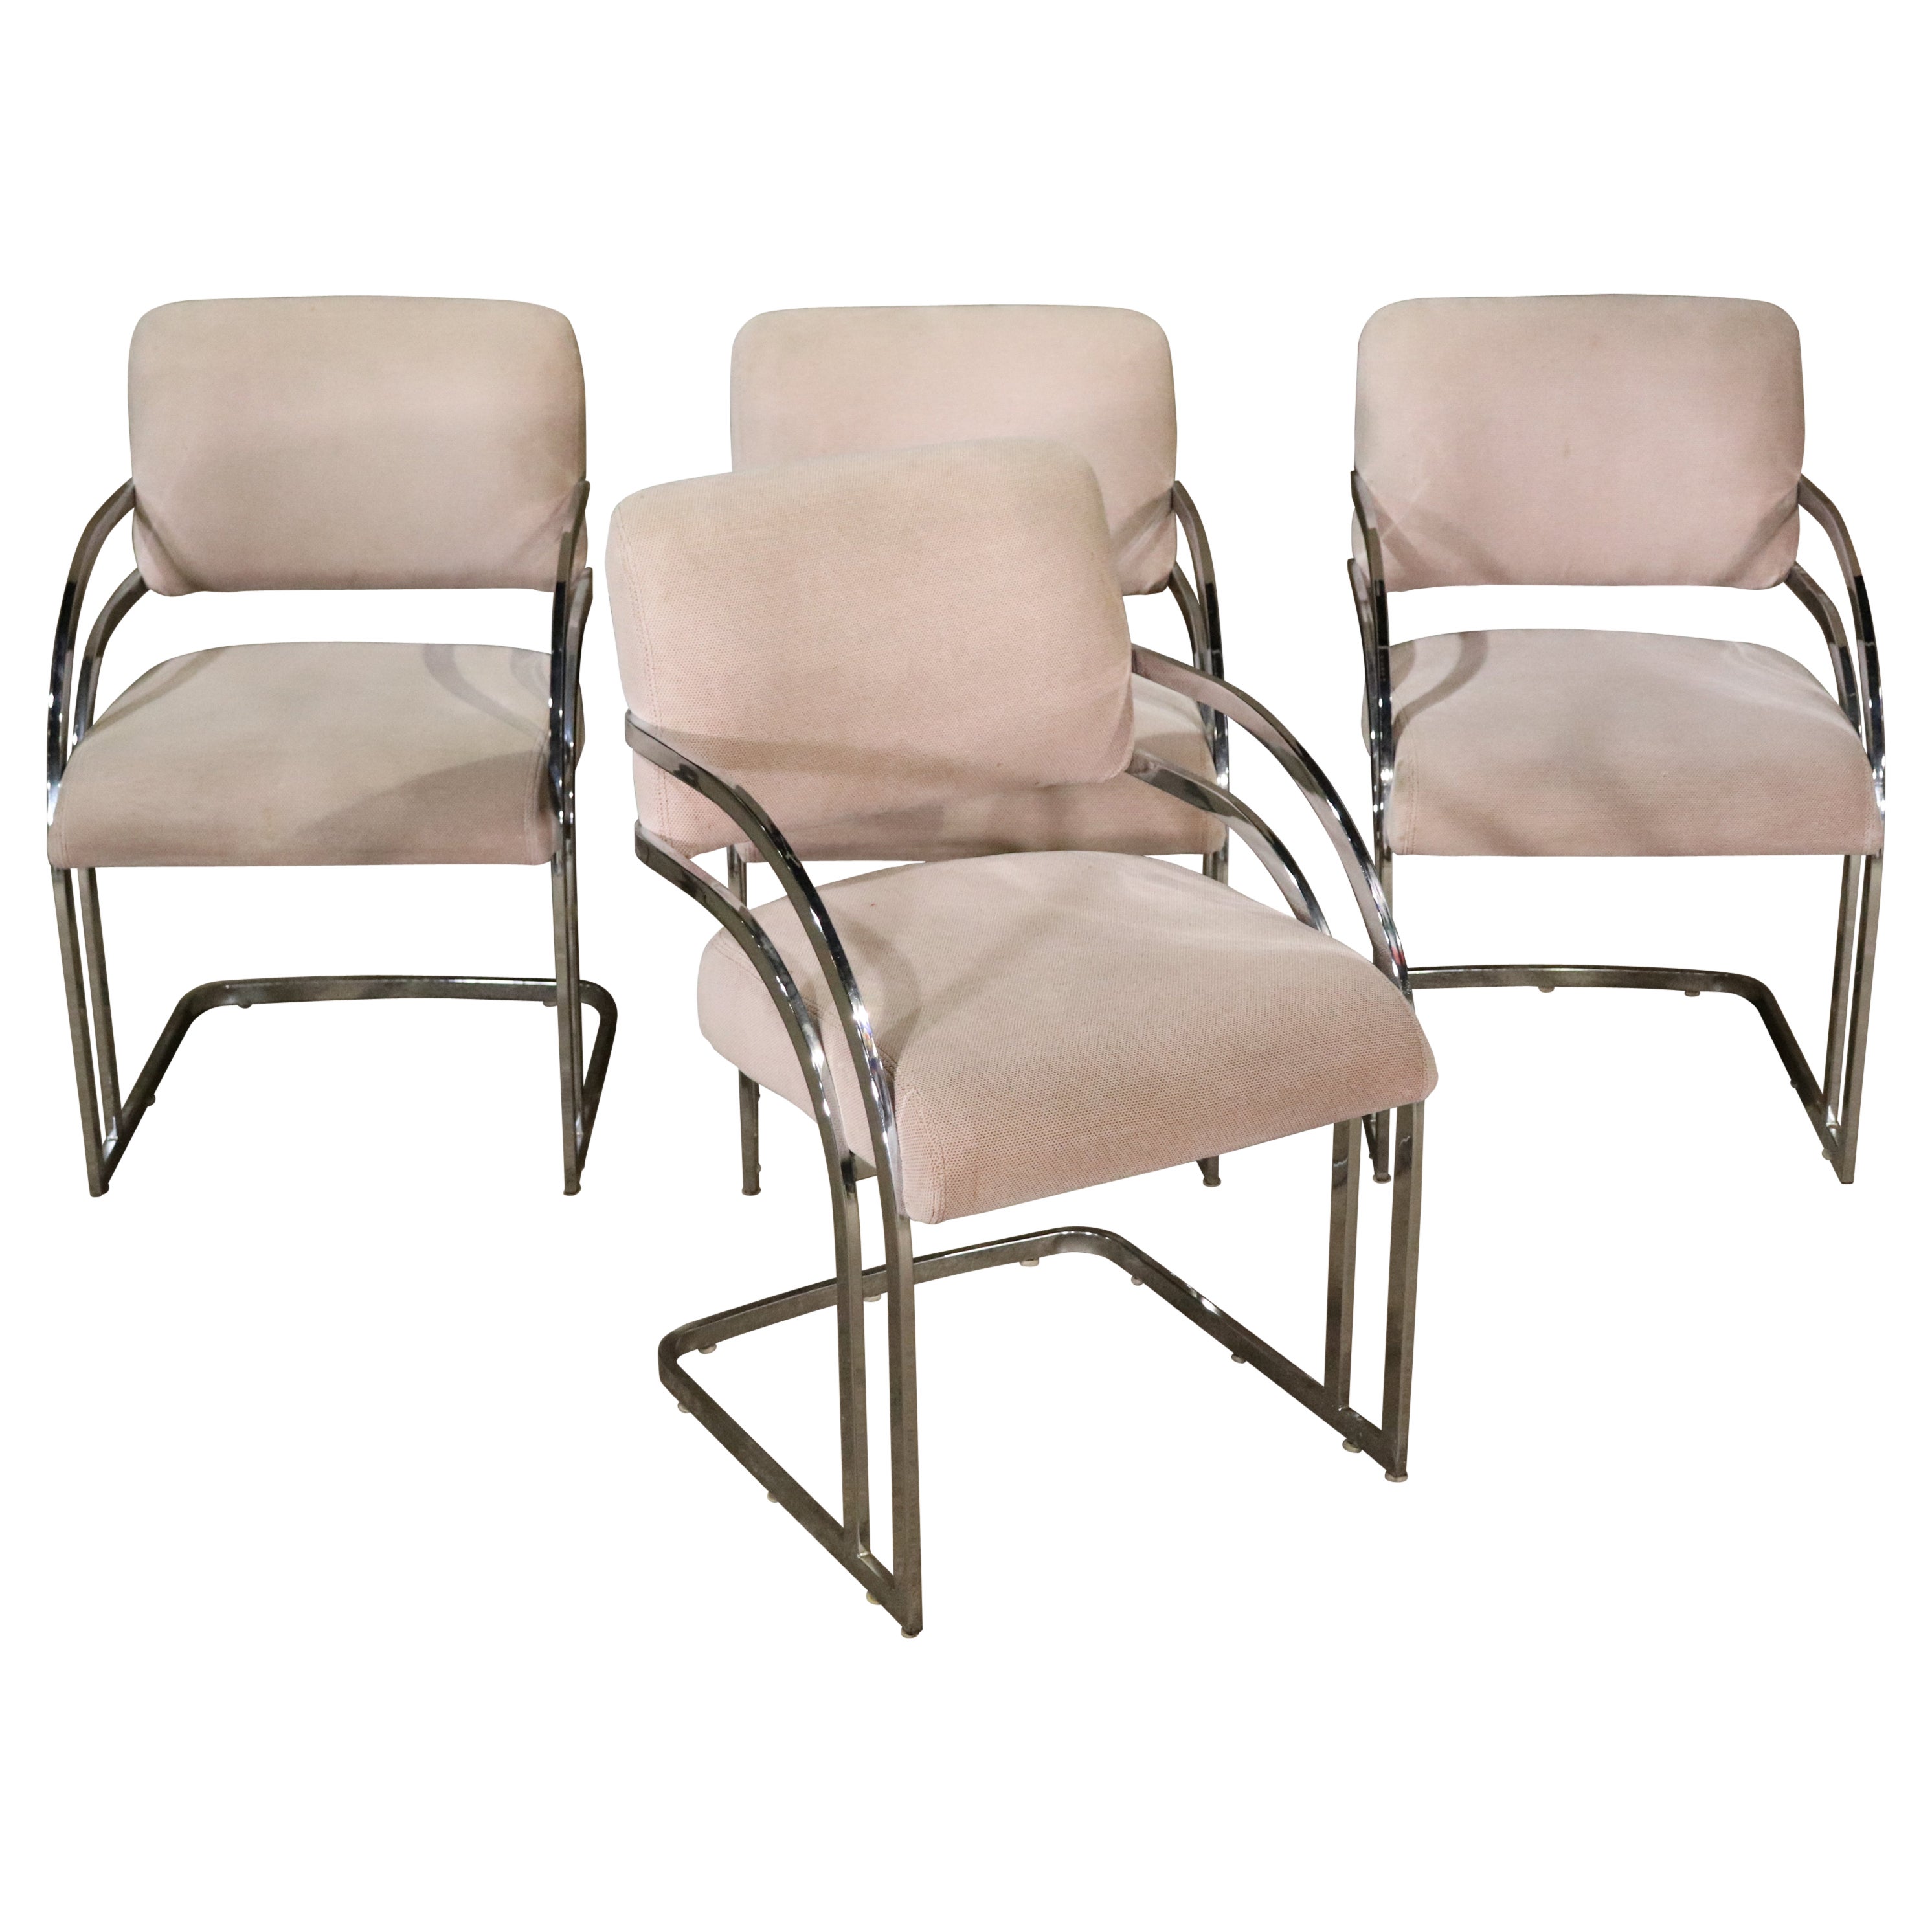 Mid-century Chrome Chairs For Sale